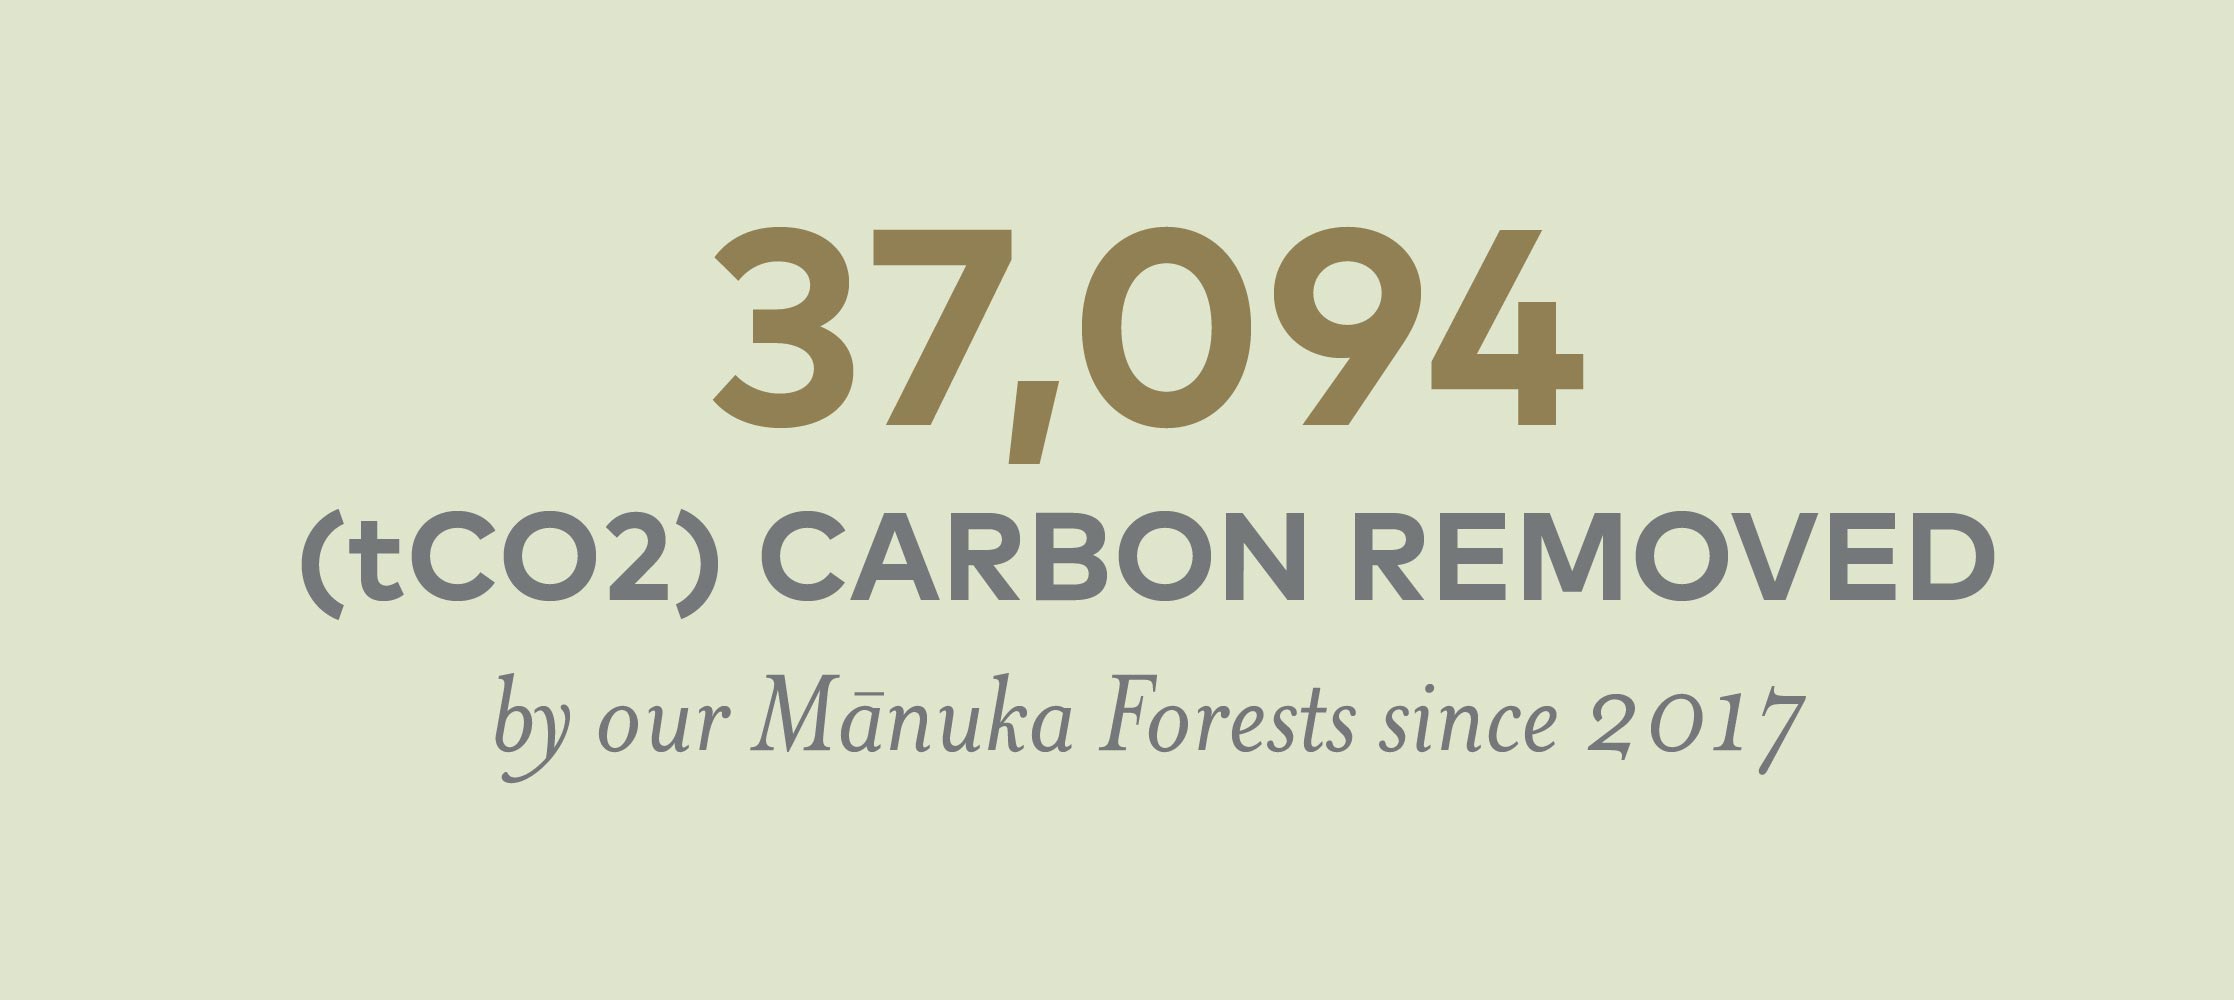 37,094 (tCO2) CARBON REMOVEDby our Mānuka Forests since 2017